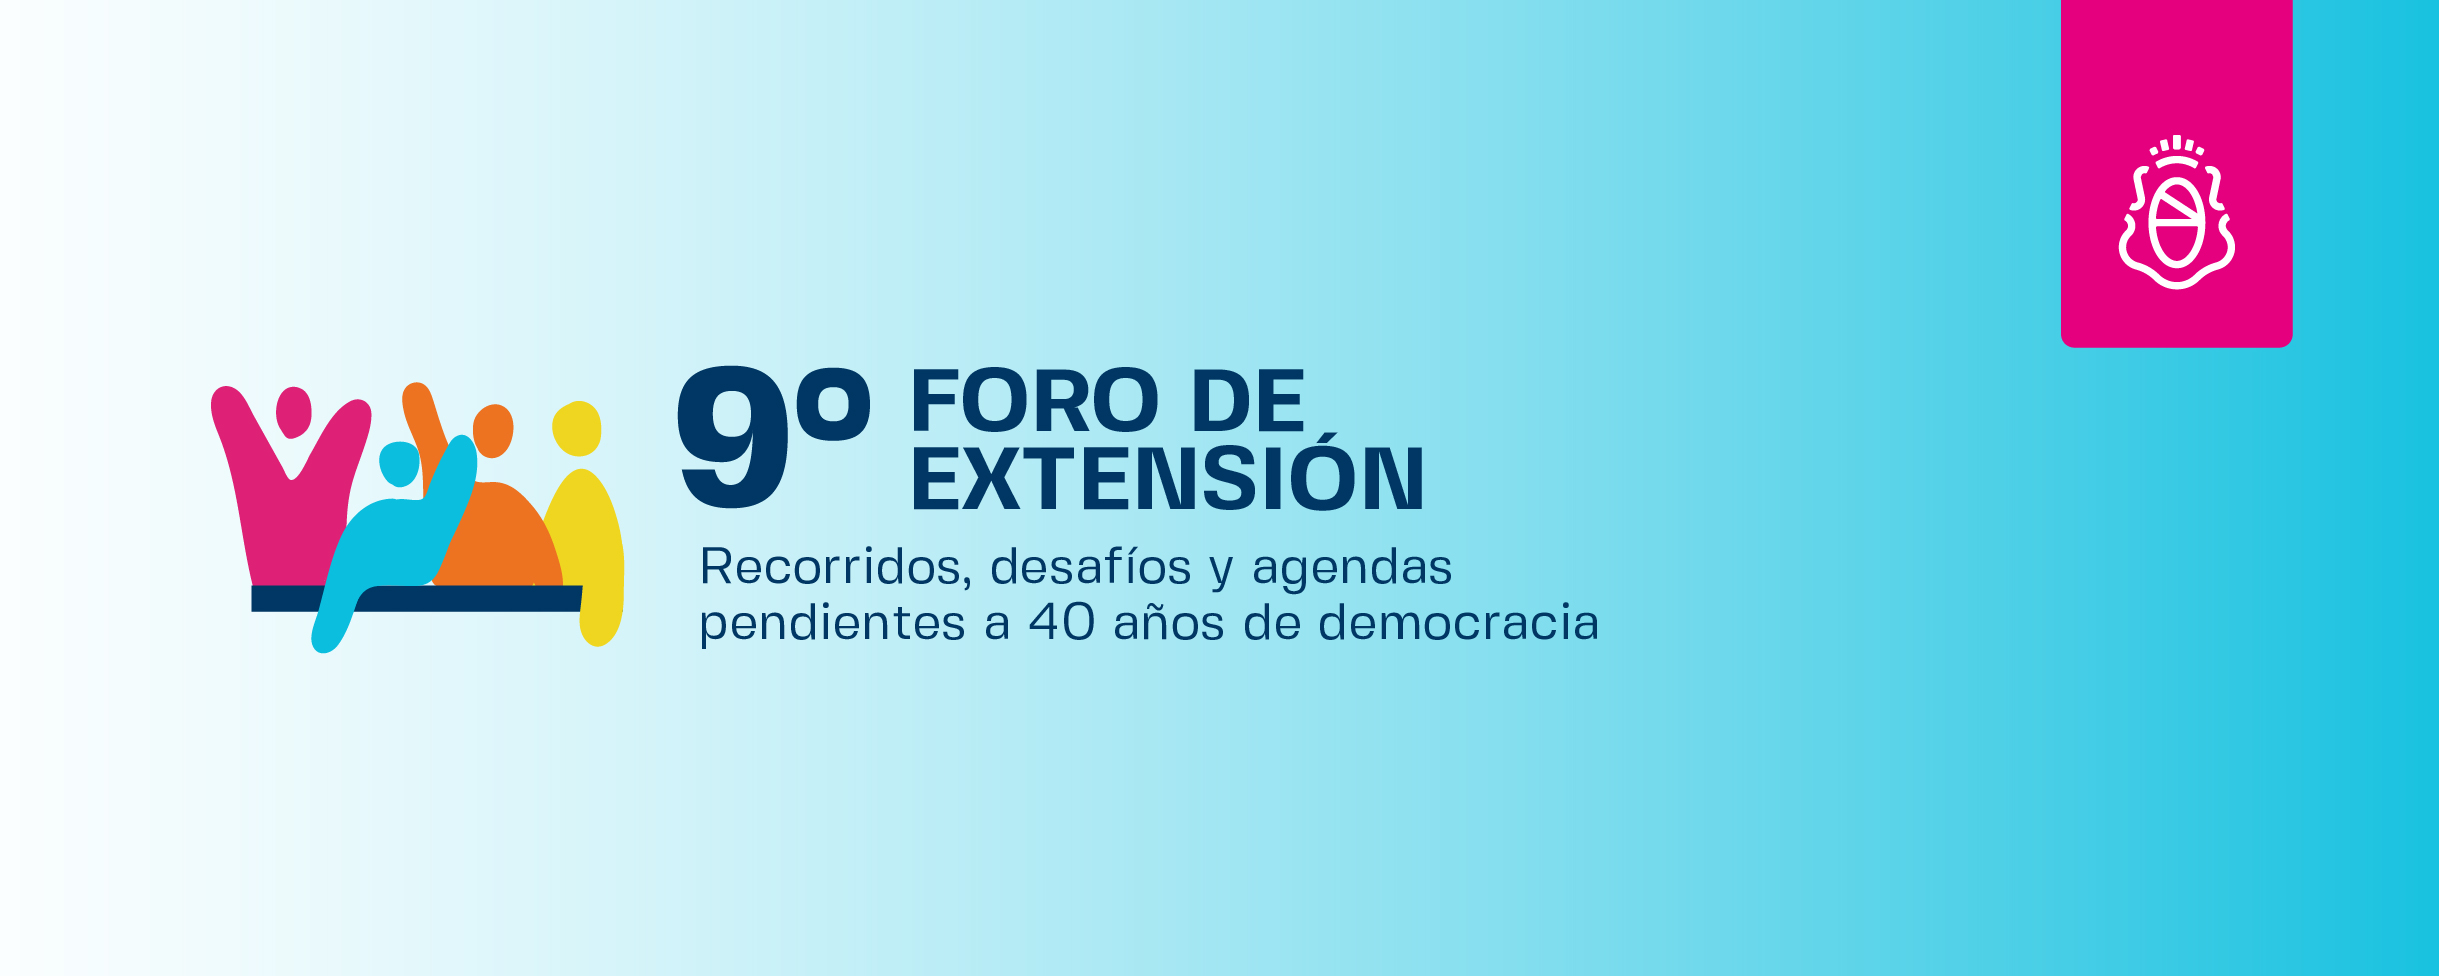 unc 9 foro extension